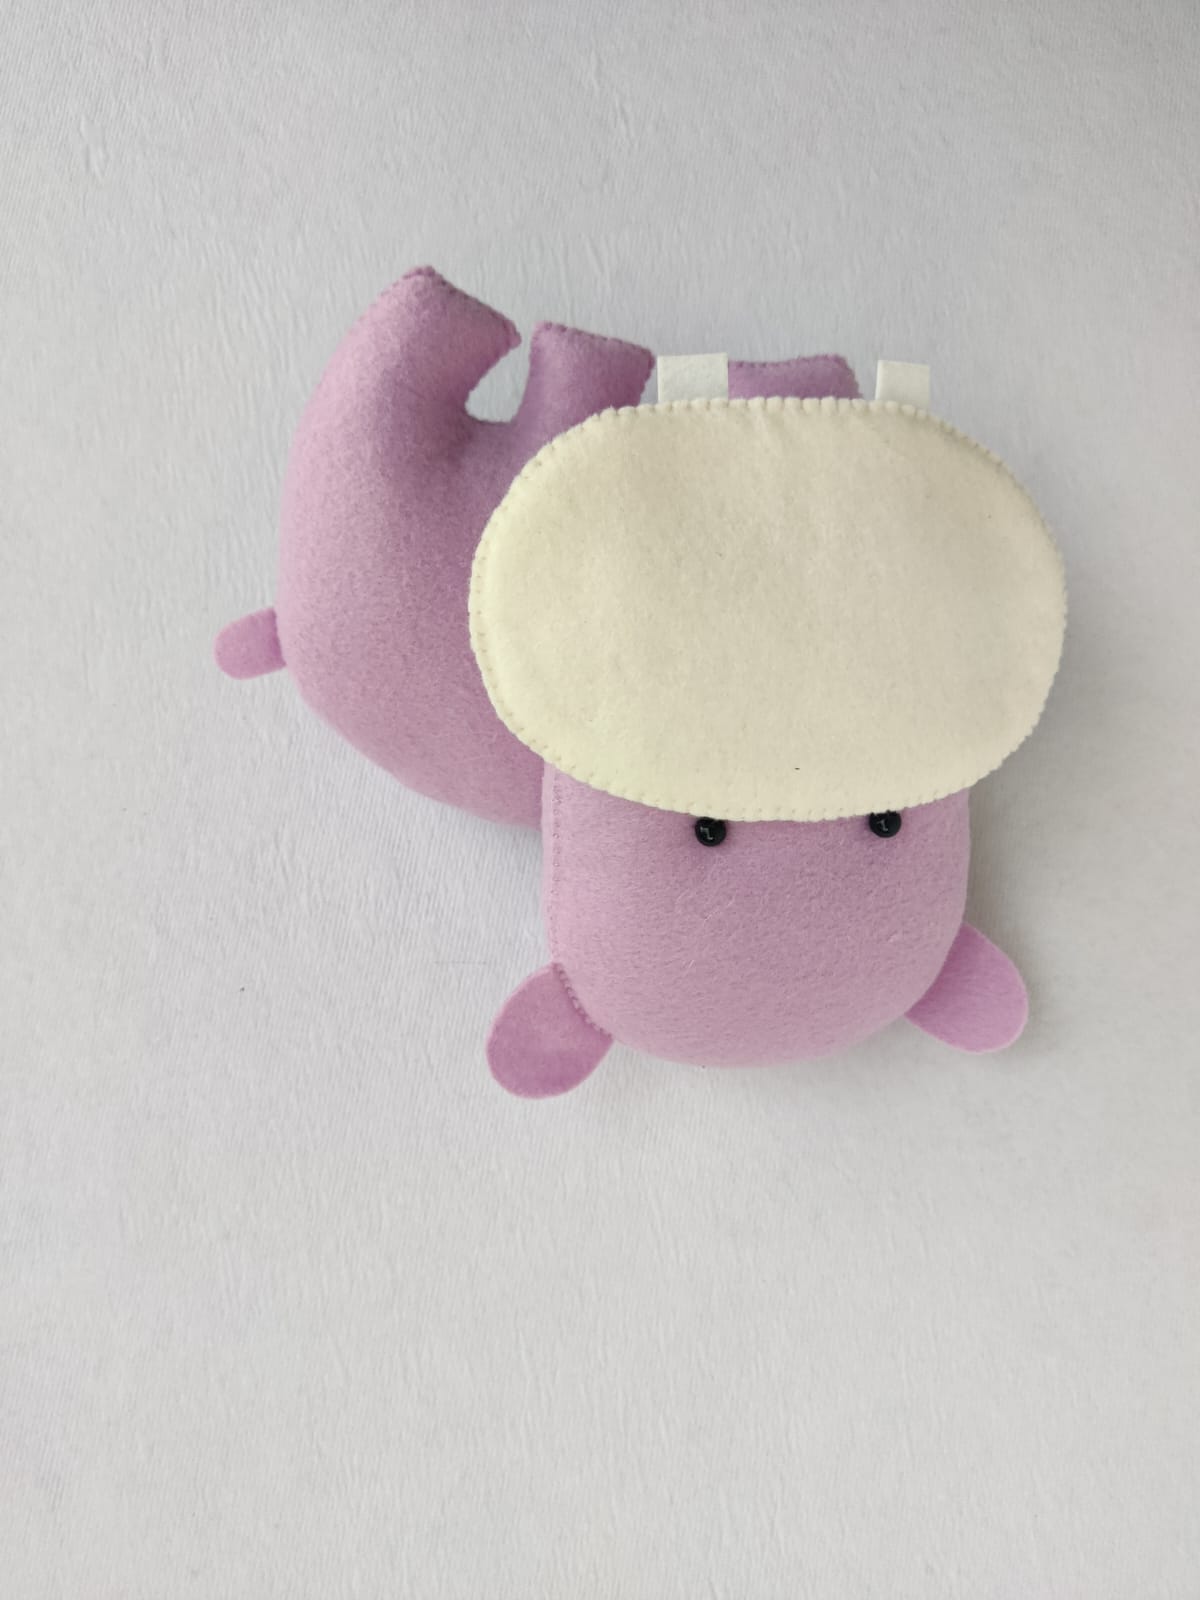 Cute and Cuddly Felt Hippo: Soft Plush Toys for Toddlers Kids (PREPAID ORDER)